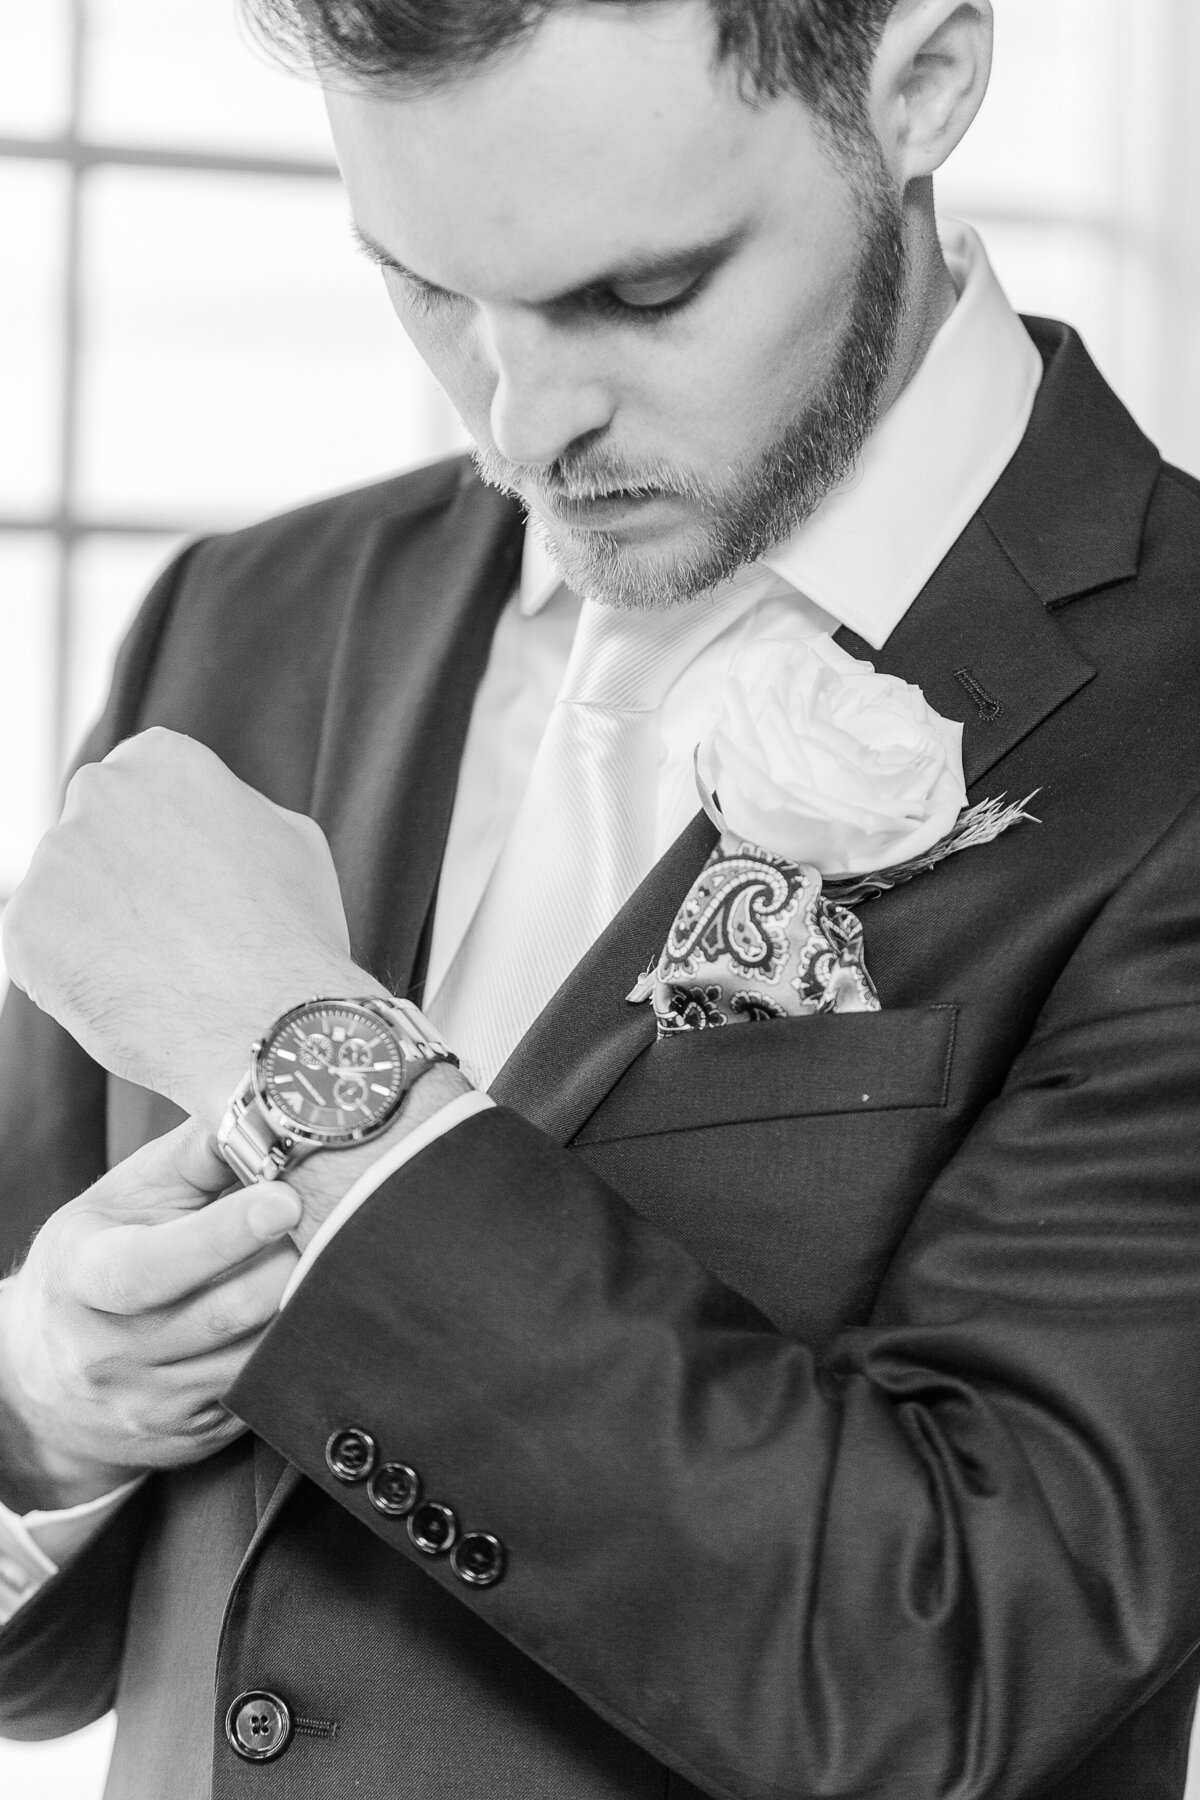 Detail image of groom adjusting his watch before his wedding at the Madison Beach Hotel. Captured by best New England wedding photographer Lia Rose Weddings.